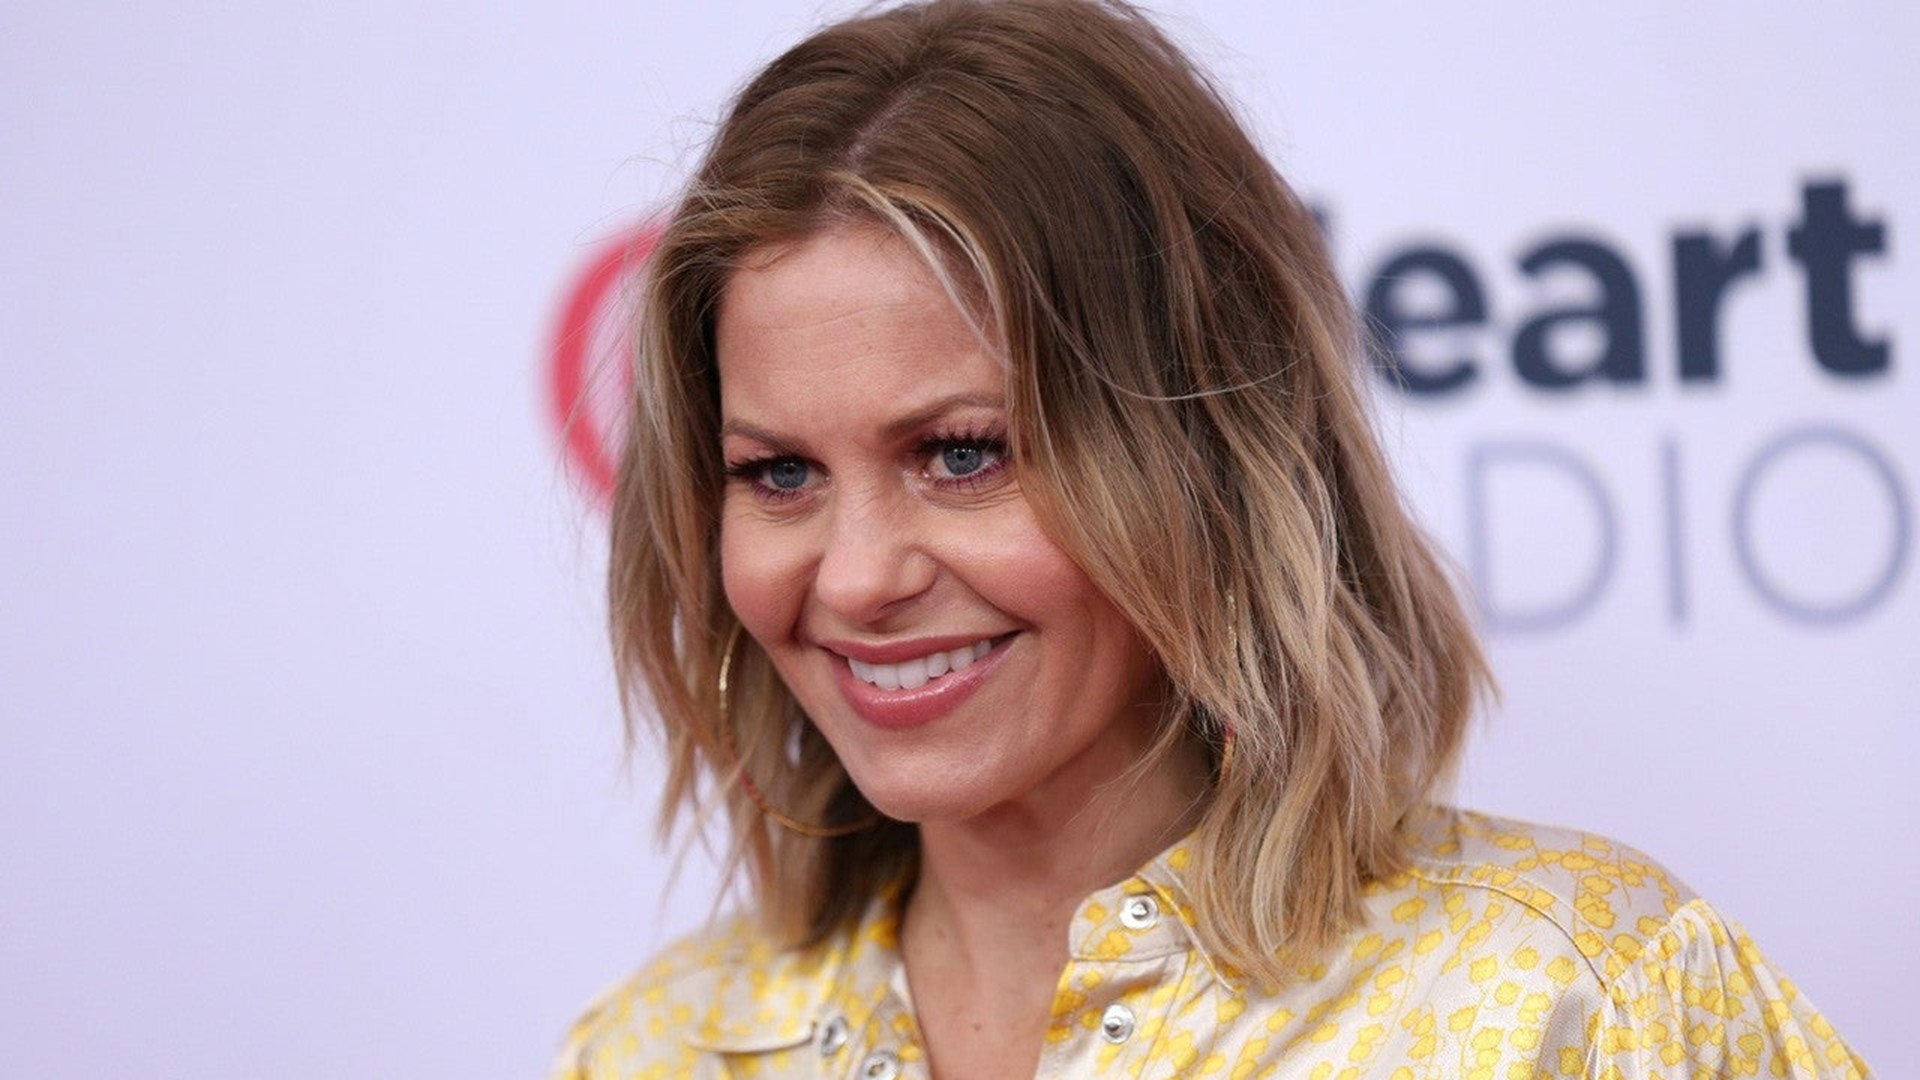 Candace Cameron Bure Gets Candid About Sex Life After Backlash To Handsy Pic With Husband